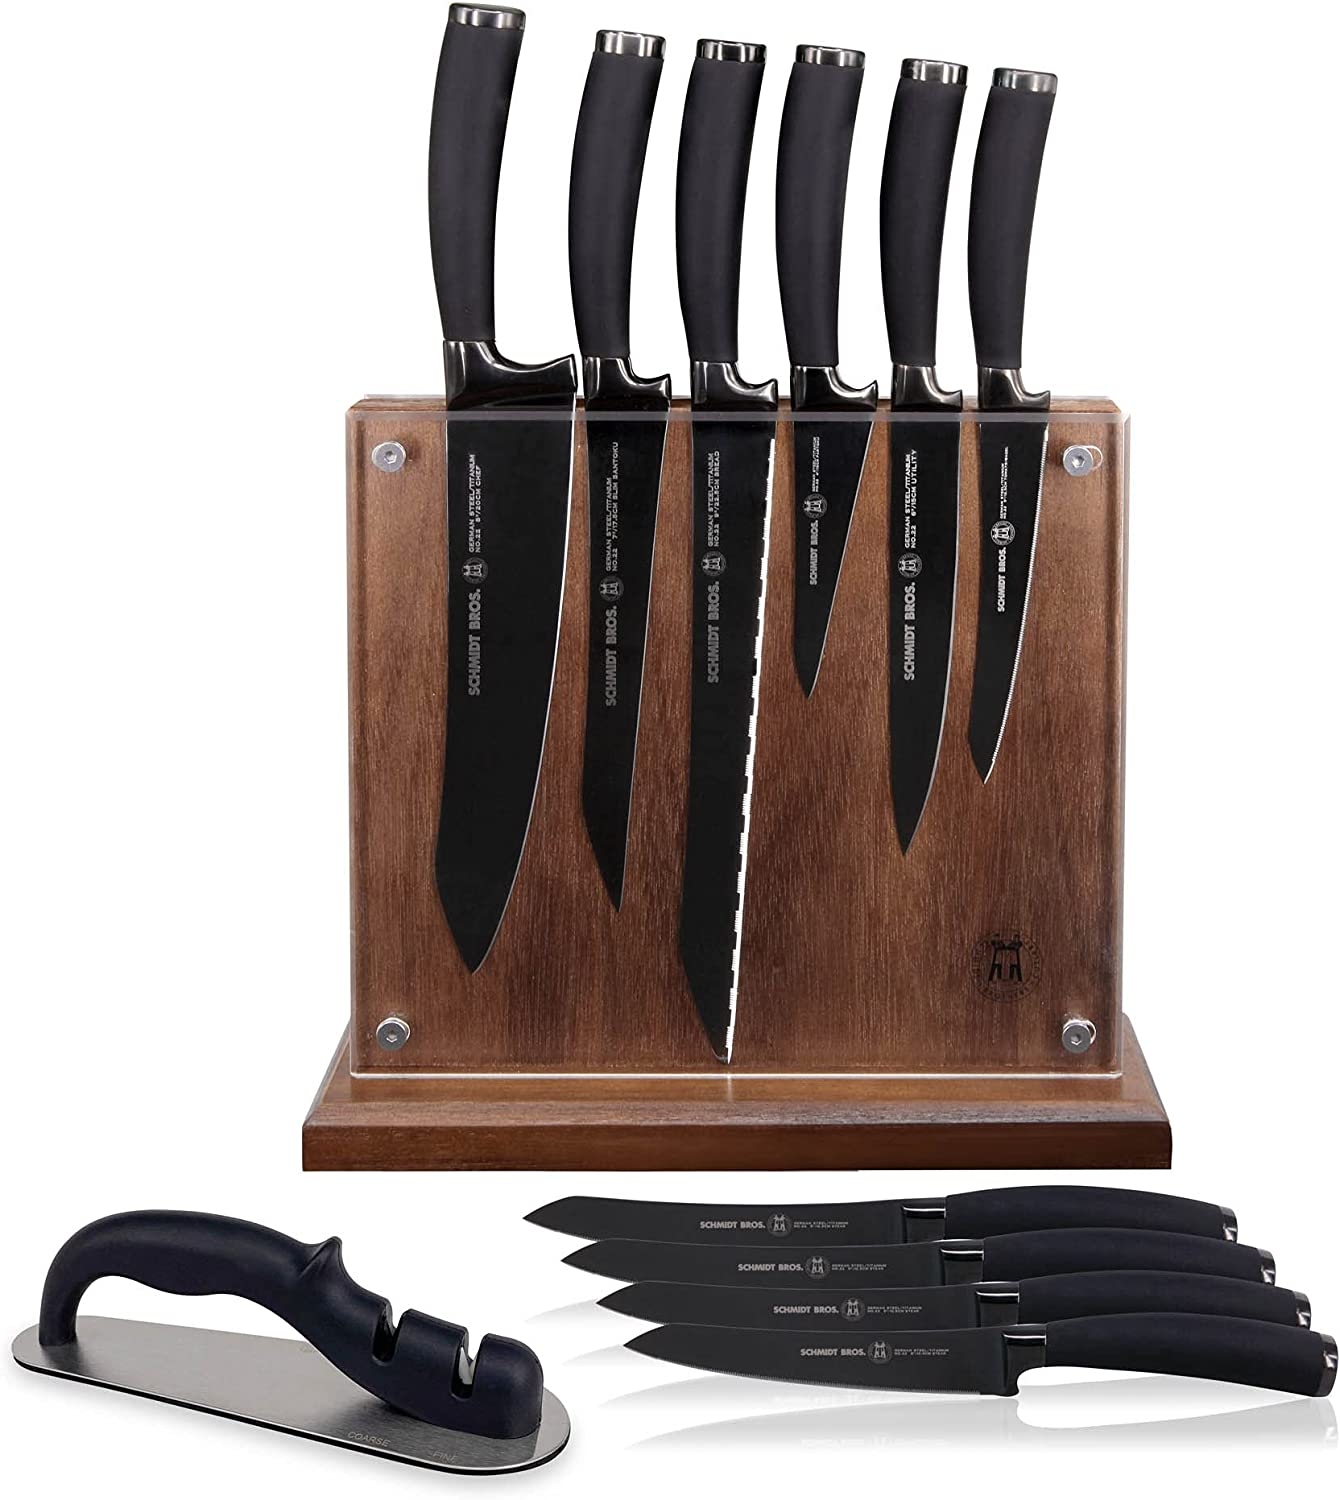 Schmidt Brothers-Titan 22-Series 12-Piece Kitchen Knife Set, High-Carbon German Stainless Steel Cutlery Coated In Pure Titanium,